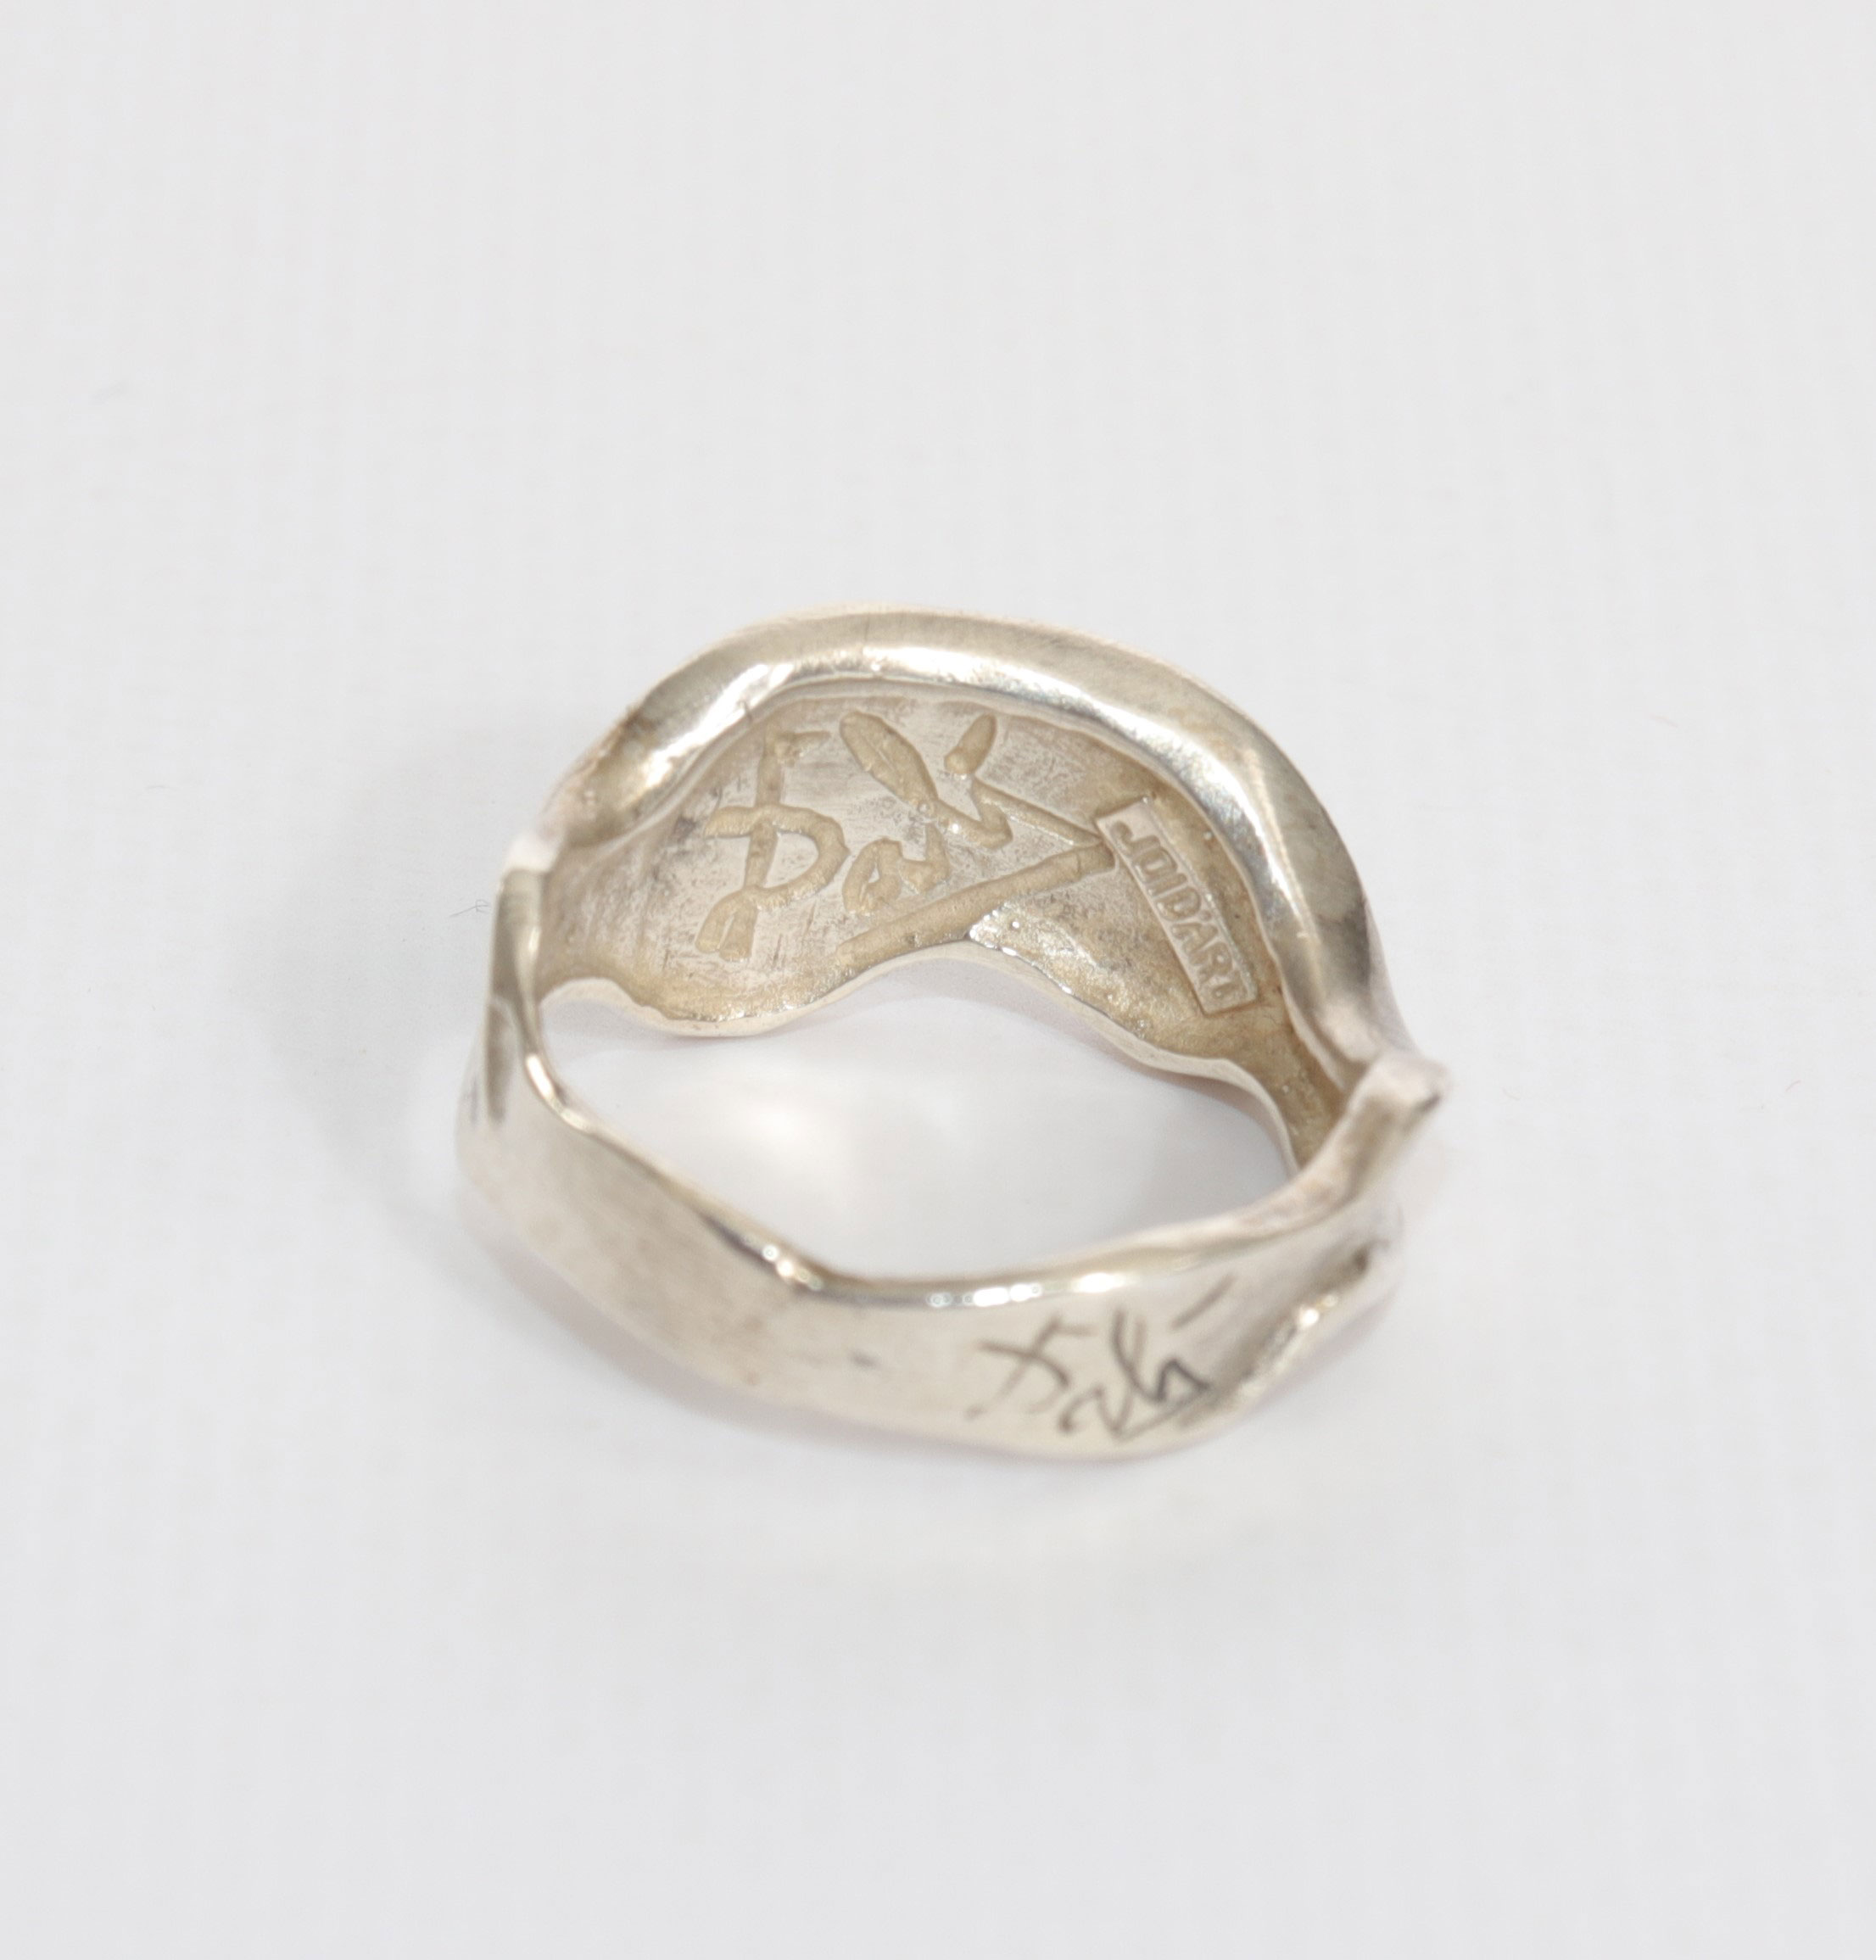 Salvador Dali. Circa 60. Soft watch. Sterling silver ring representing a soft watch. - Image 2 of 3